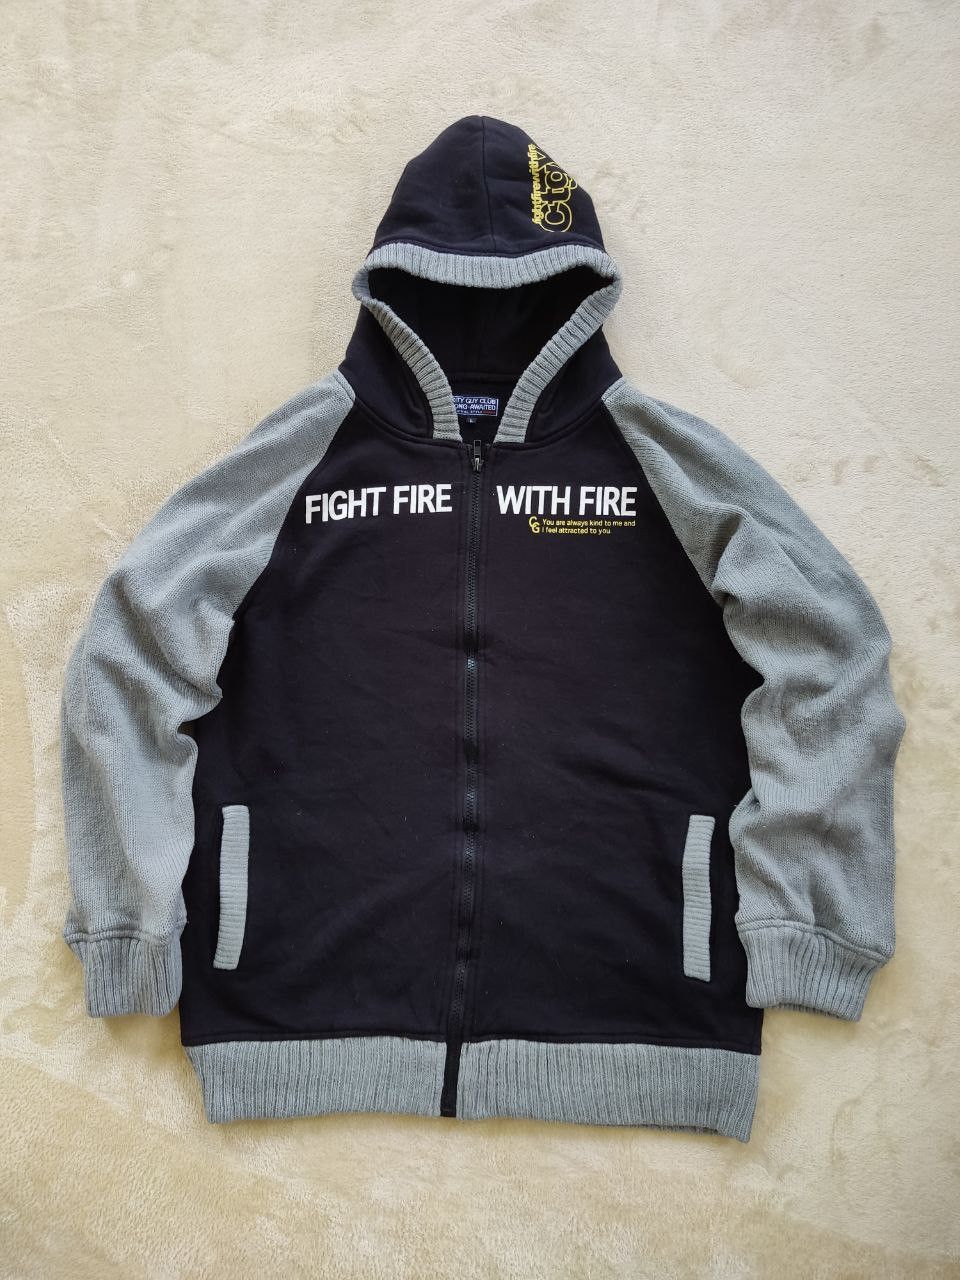 Archival Clothing - CTGY Fight Fire With Fire Varsity Knitted Zipper Hoodie - 2